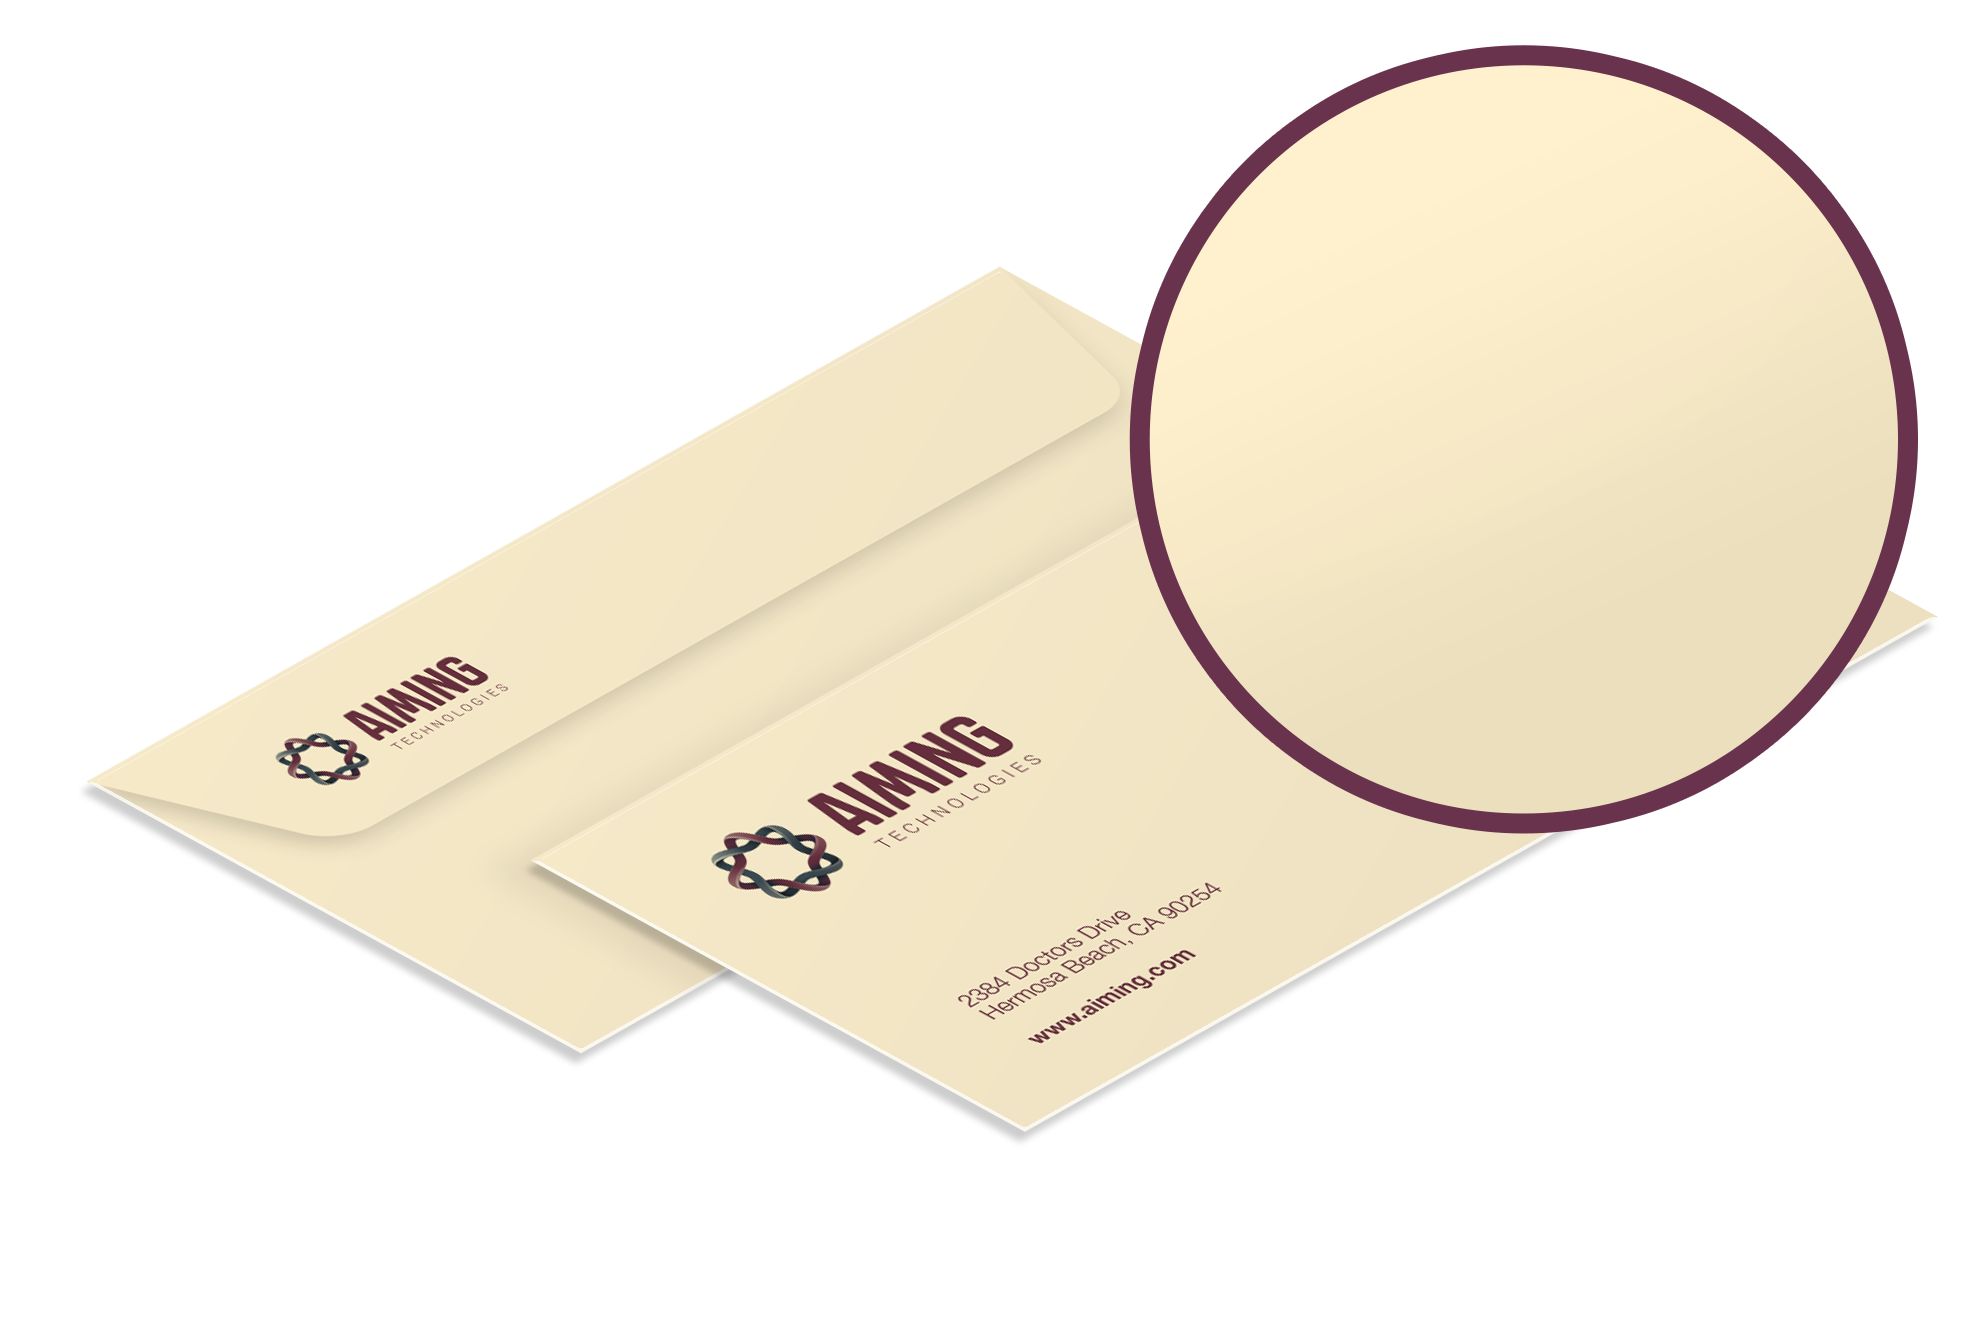 Order Online your Splendorgel Avorio envelopes on Sprint24: Delicate color and velvety paper. Add your details to the splendorgel Avorio envelopes on Sprint24: the quality is online.